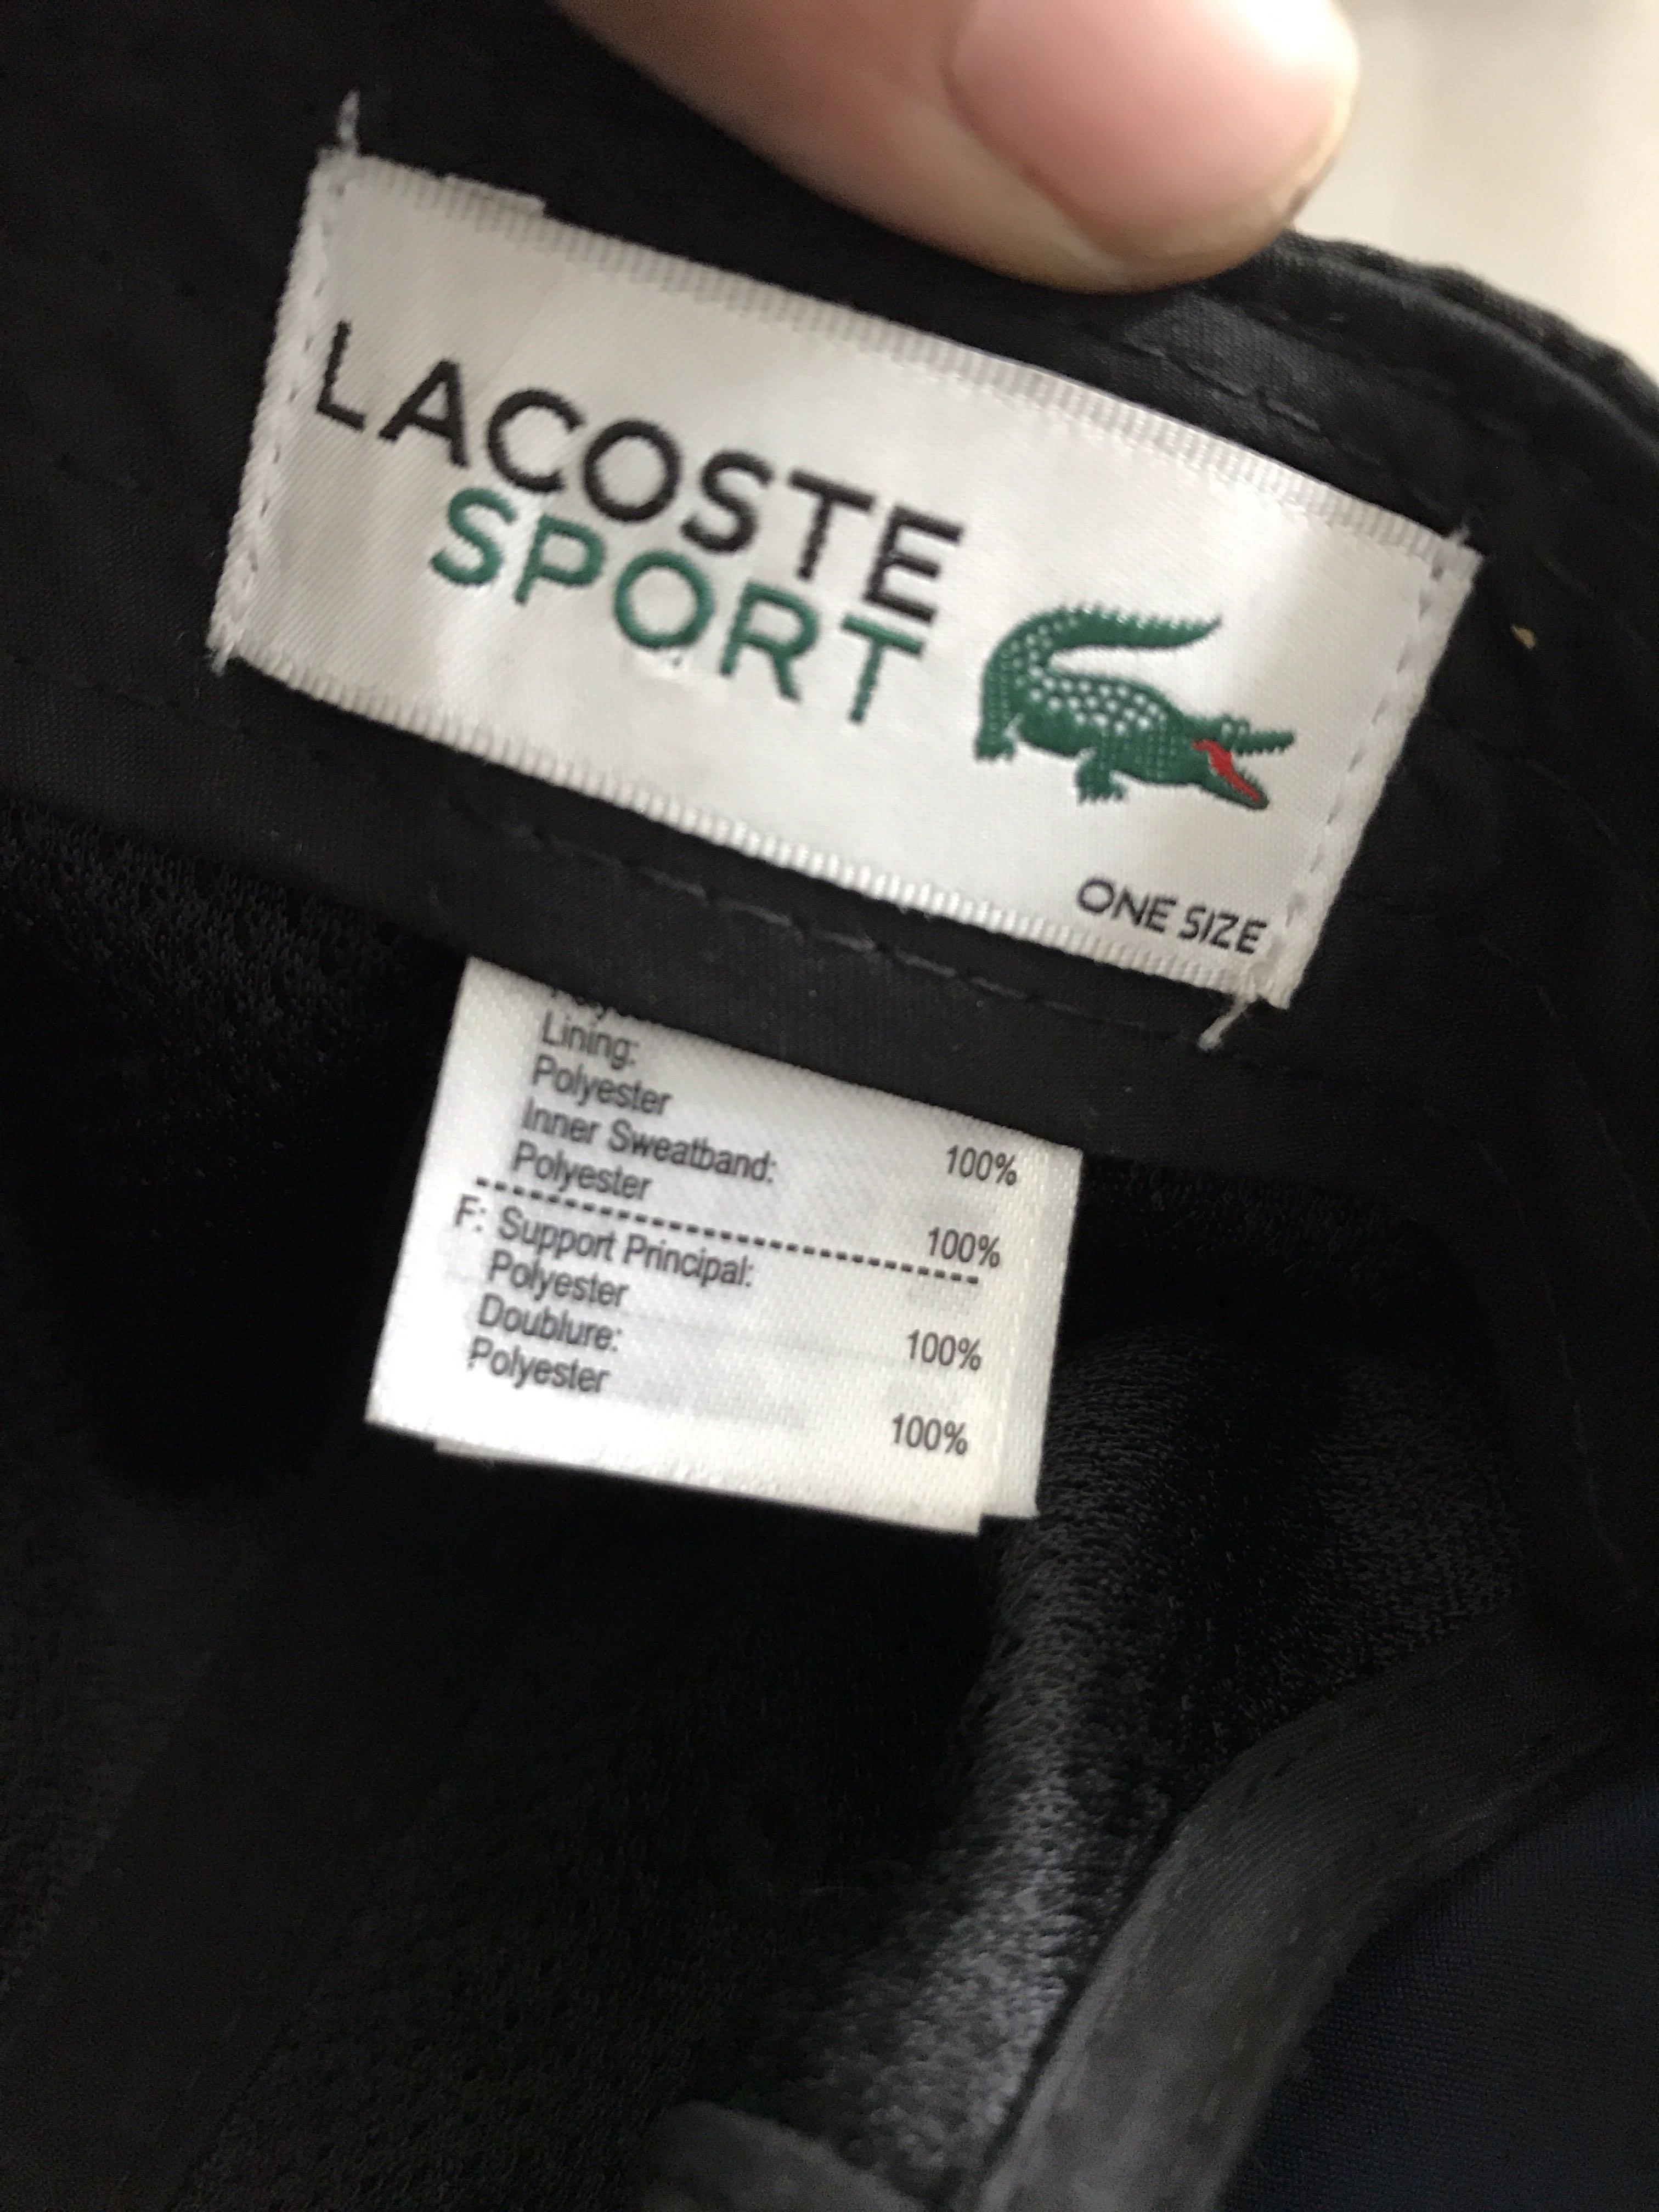 Lacoste 6 panel, Men's Fashion, Watches & Accessories, Cap & Hats on ...